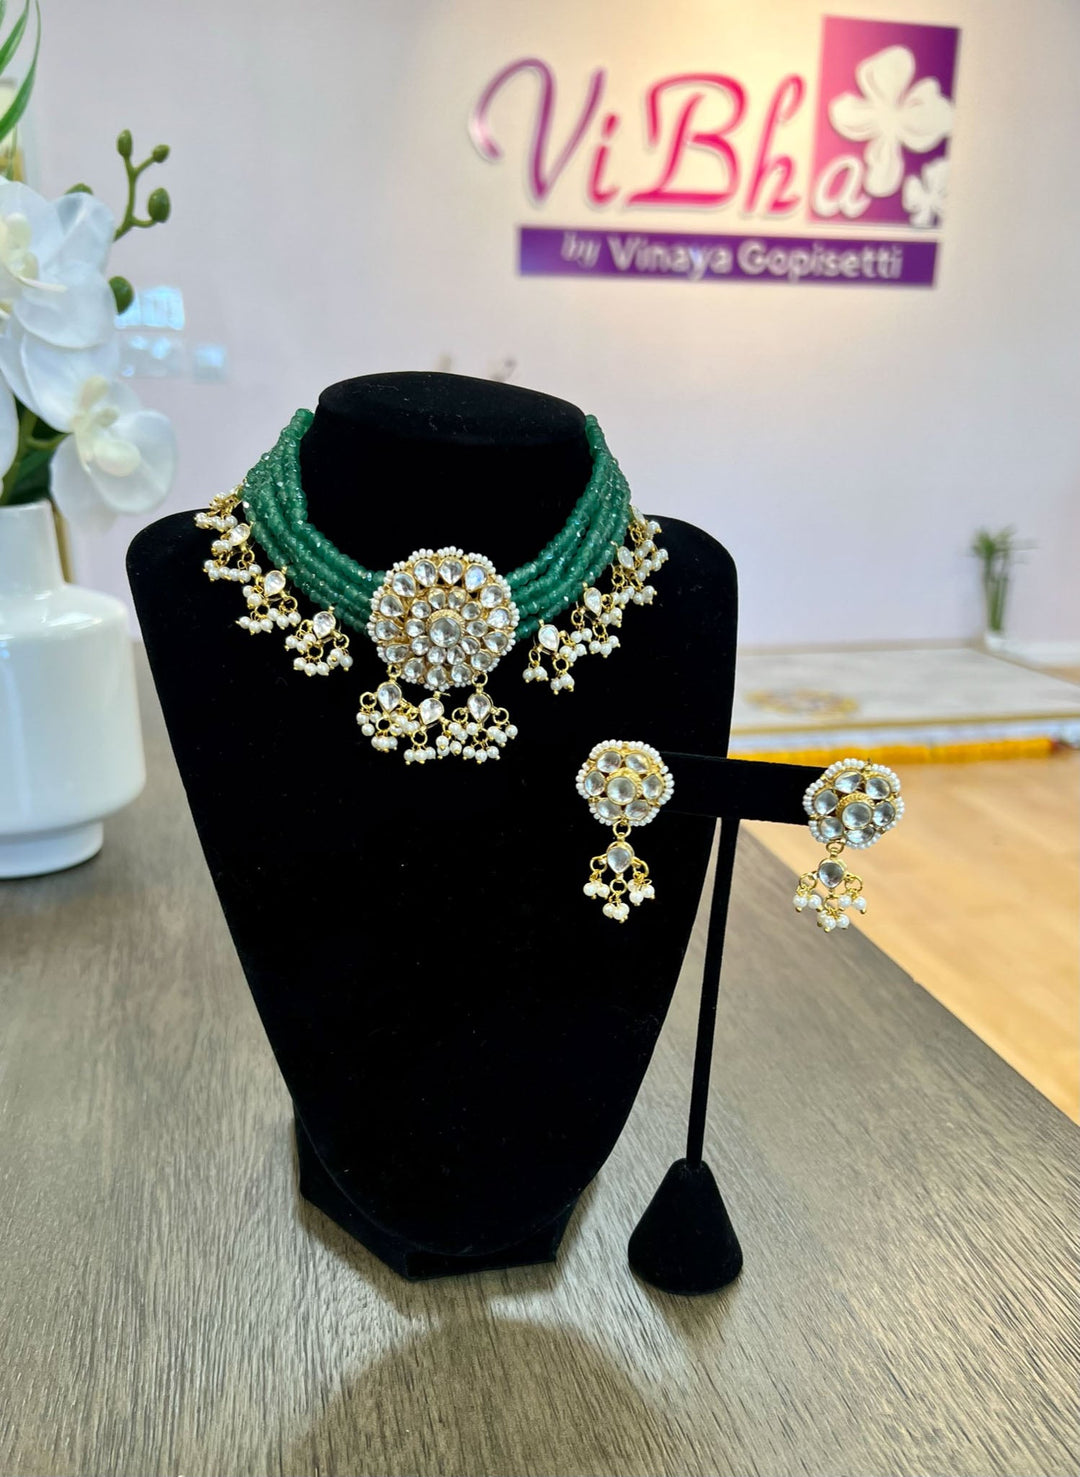 Accessories & Jewelry - Emerald & Pearl Beads Set